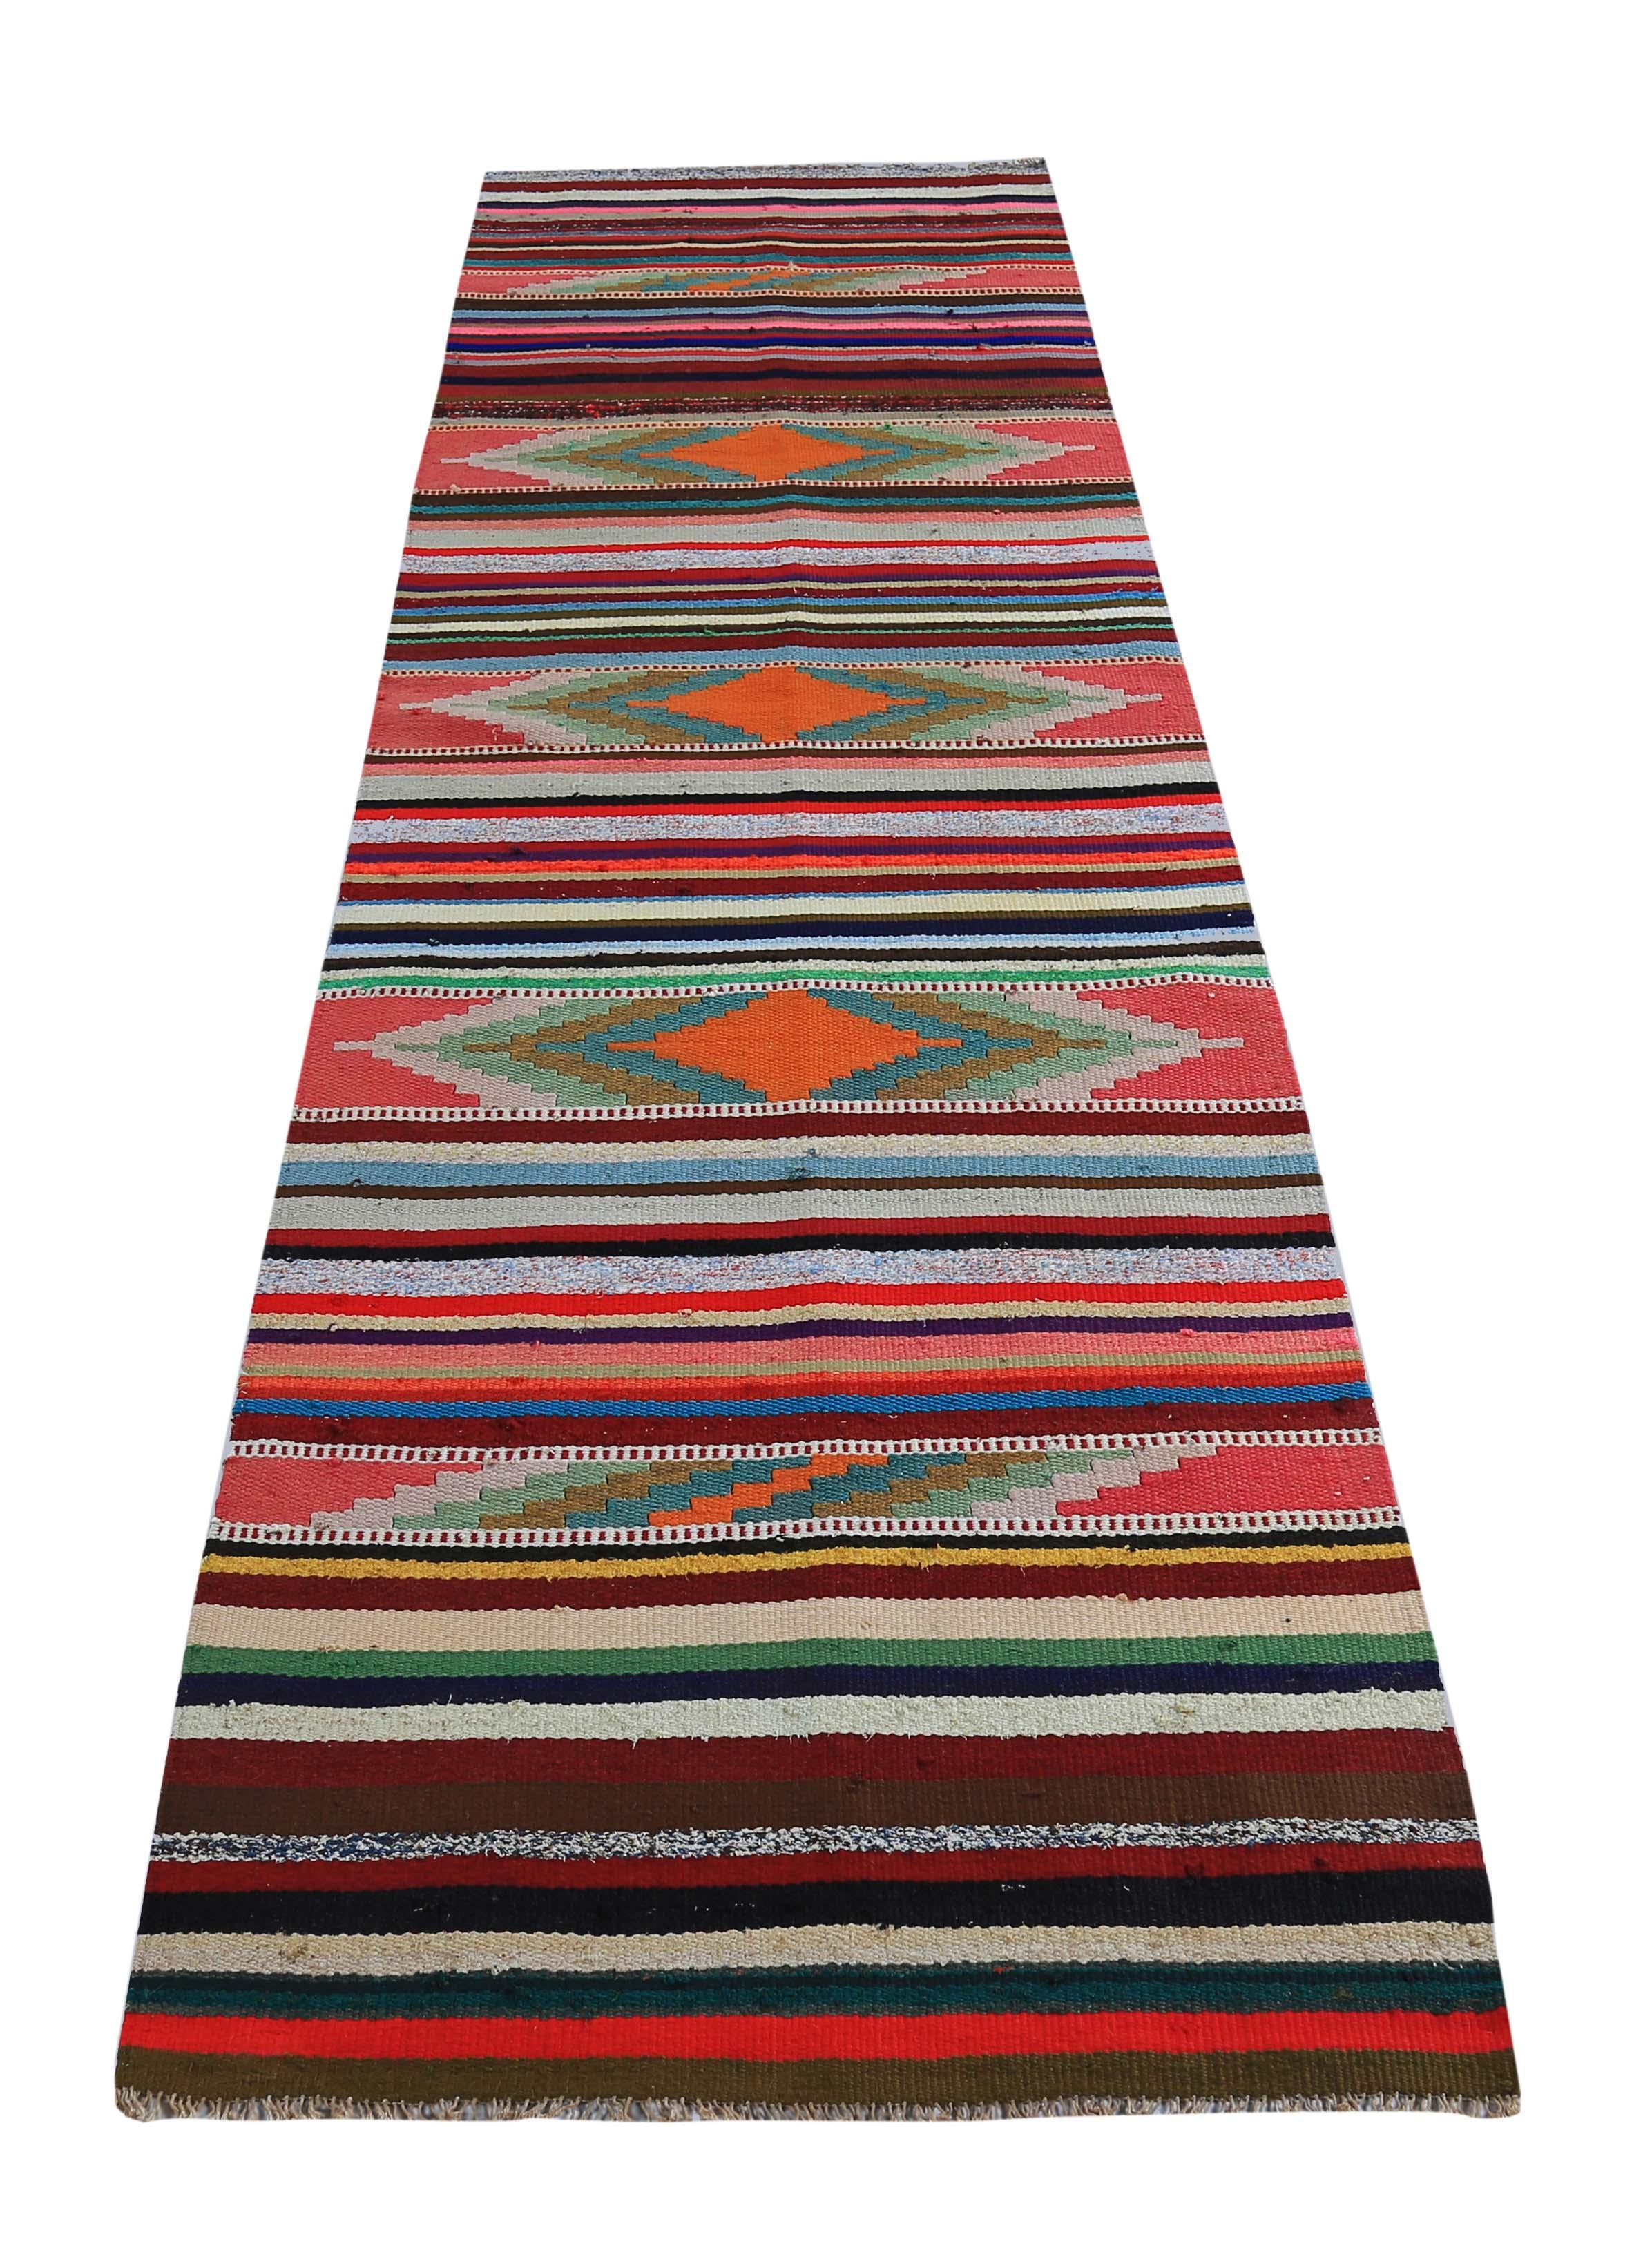 Turkish rug handwoven from the finest sheep’s wool and colored with all-natural vegetable dyes that are safe for humans and pets. It’s a traditional Kilim flat-weave design featuring red, orange and black stripes. It’s a stunning piece to get for